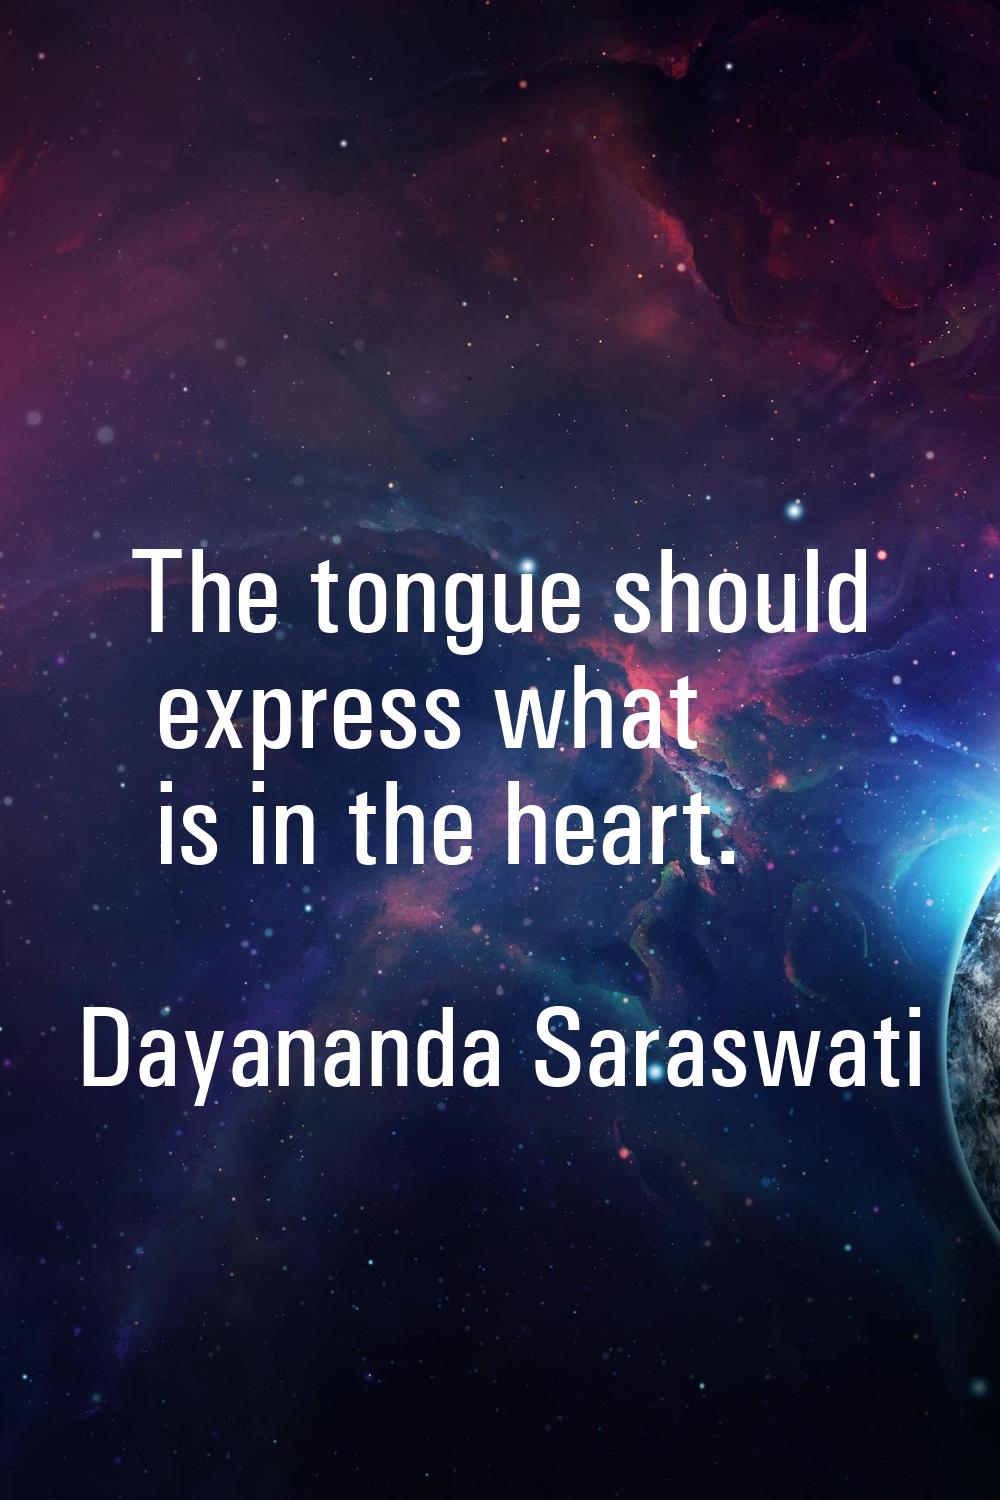 The tongue should express what is in the heart.